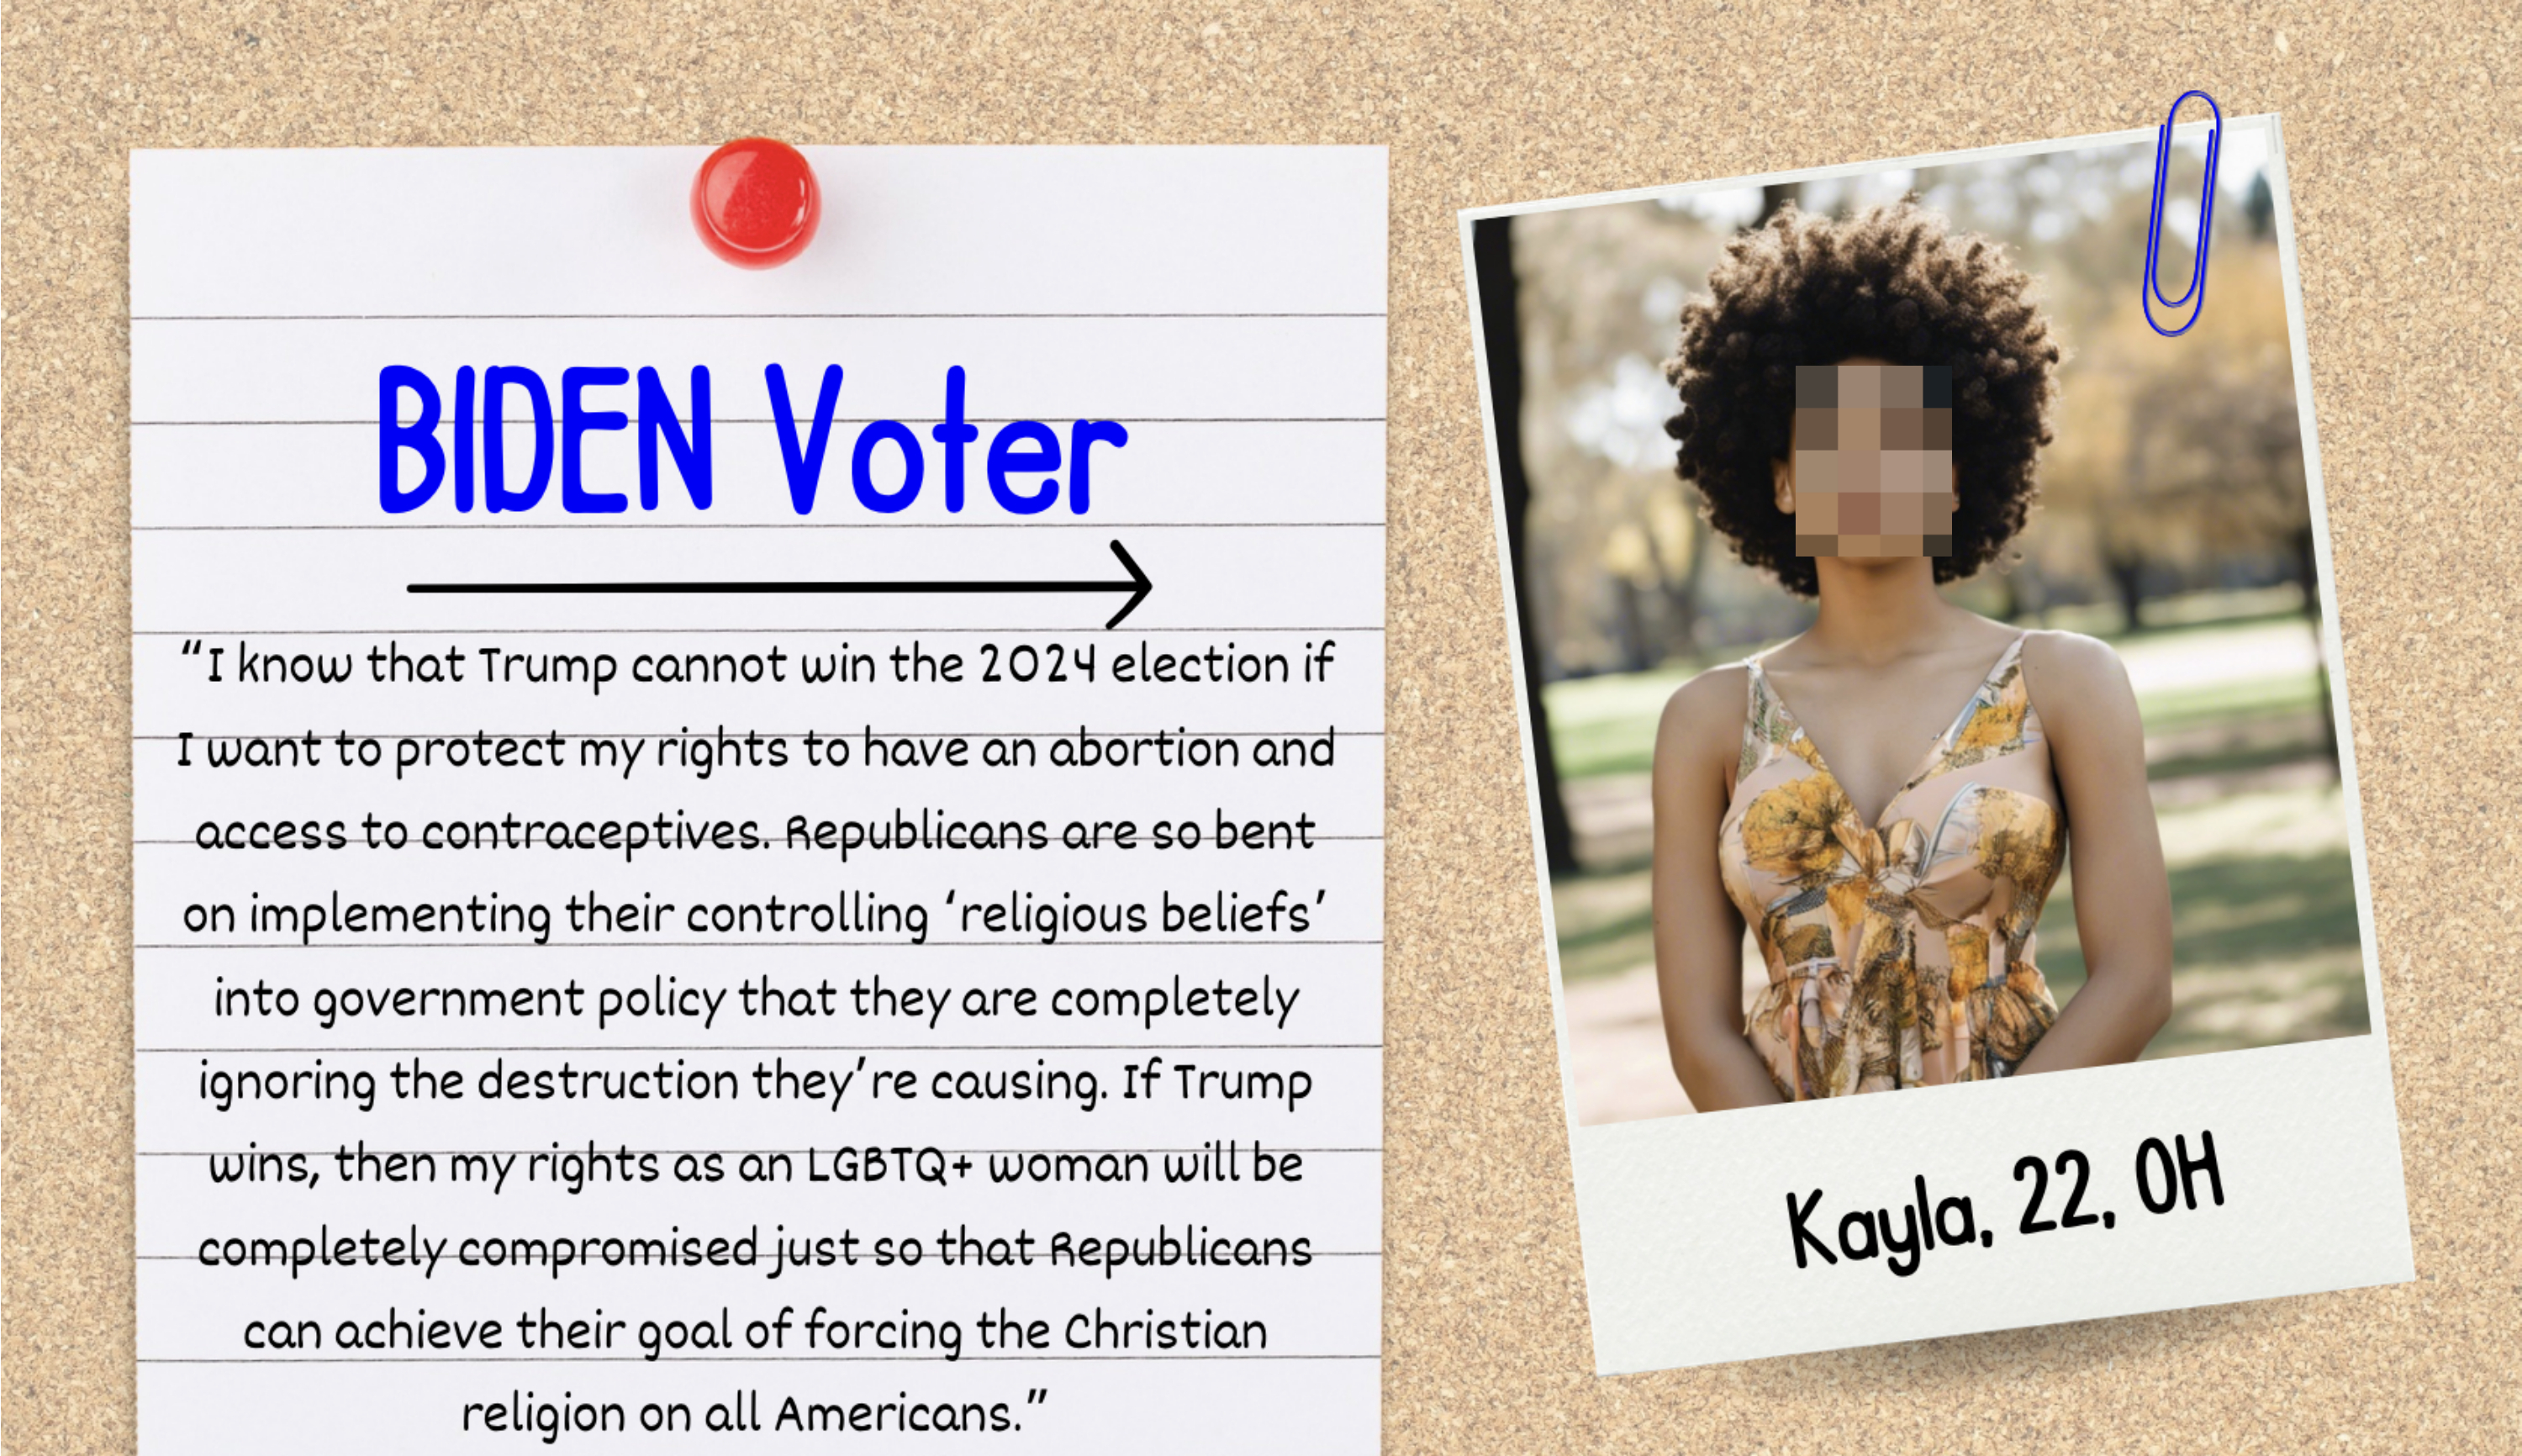 The image shows a note with text summarizing concerns about the 2024 election and Trump&#x27;s policy impacts on LGBTQ+ and religious rights, alongside a photo of Kayla, 22, OH